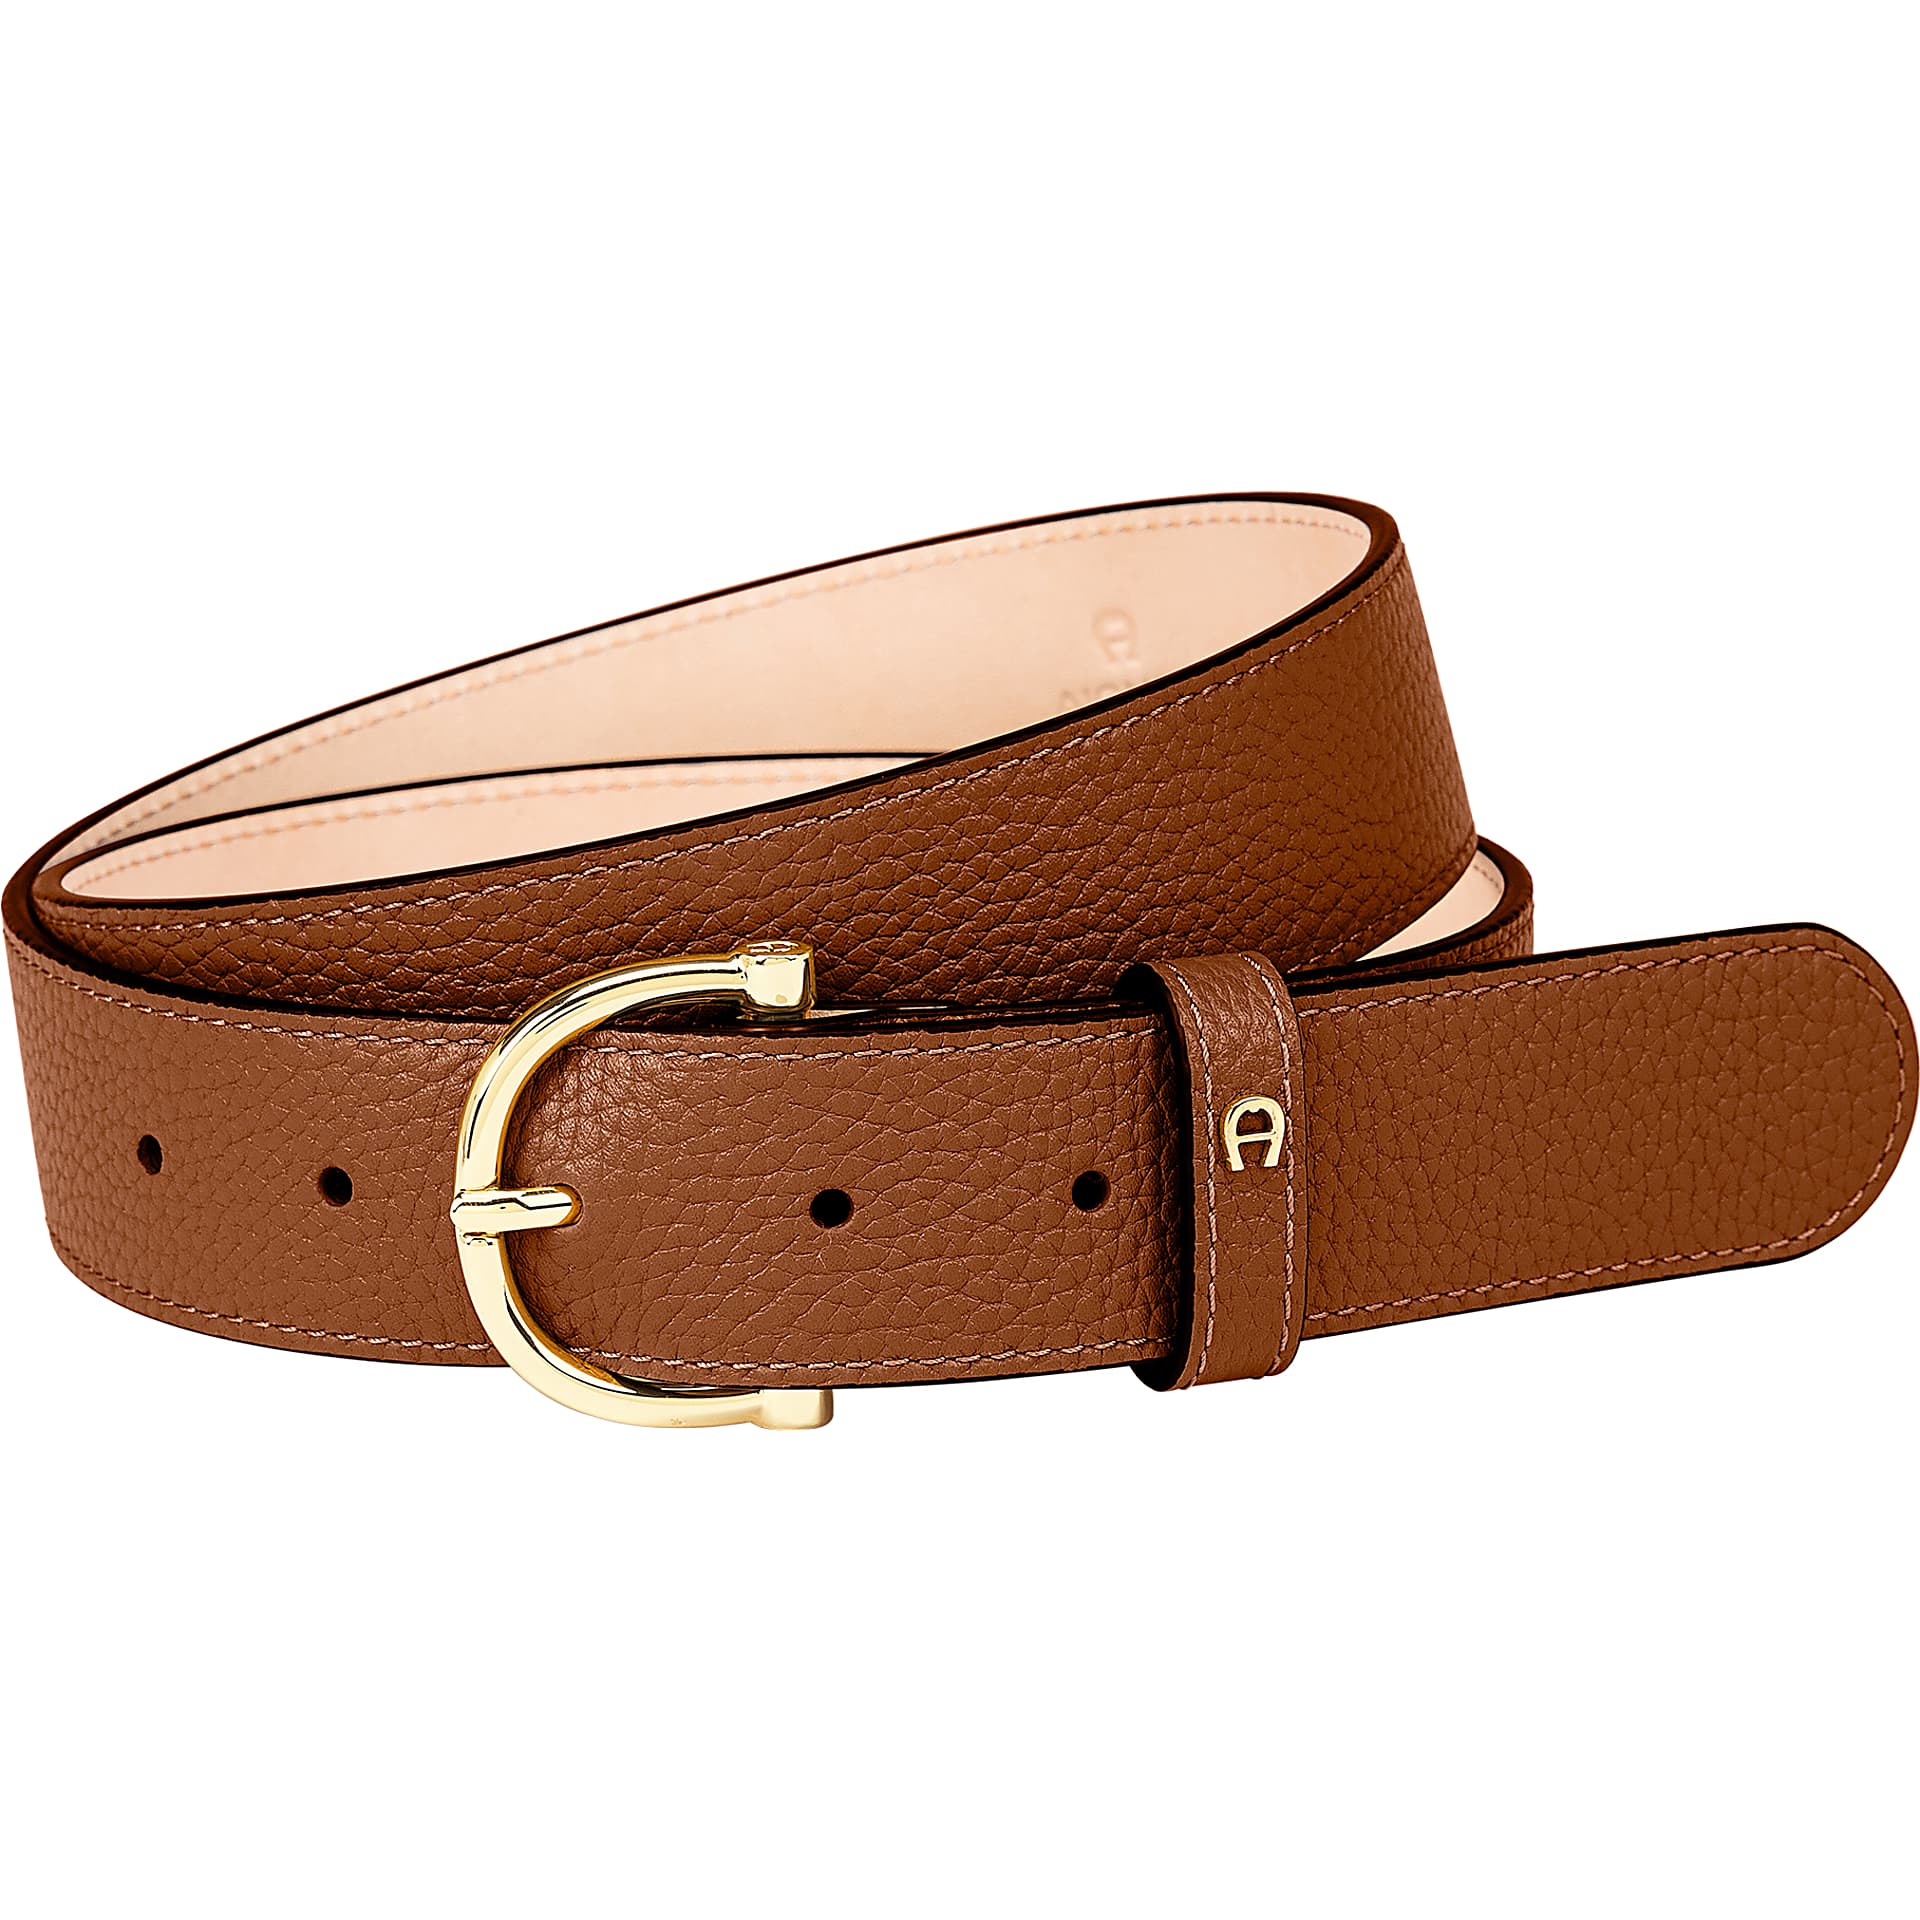 Quality leather belts for women online - Aigner